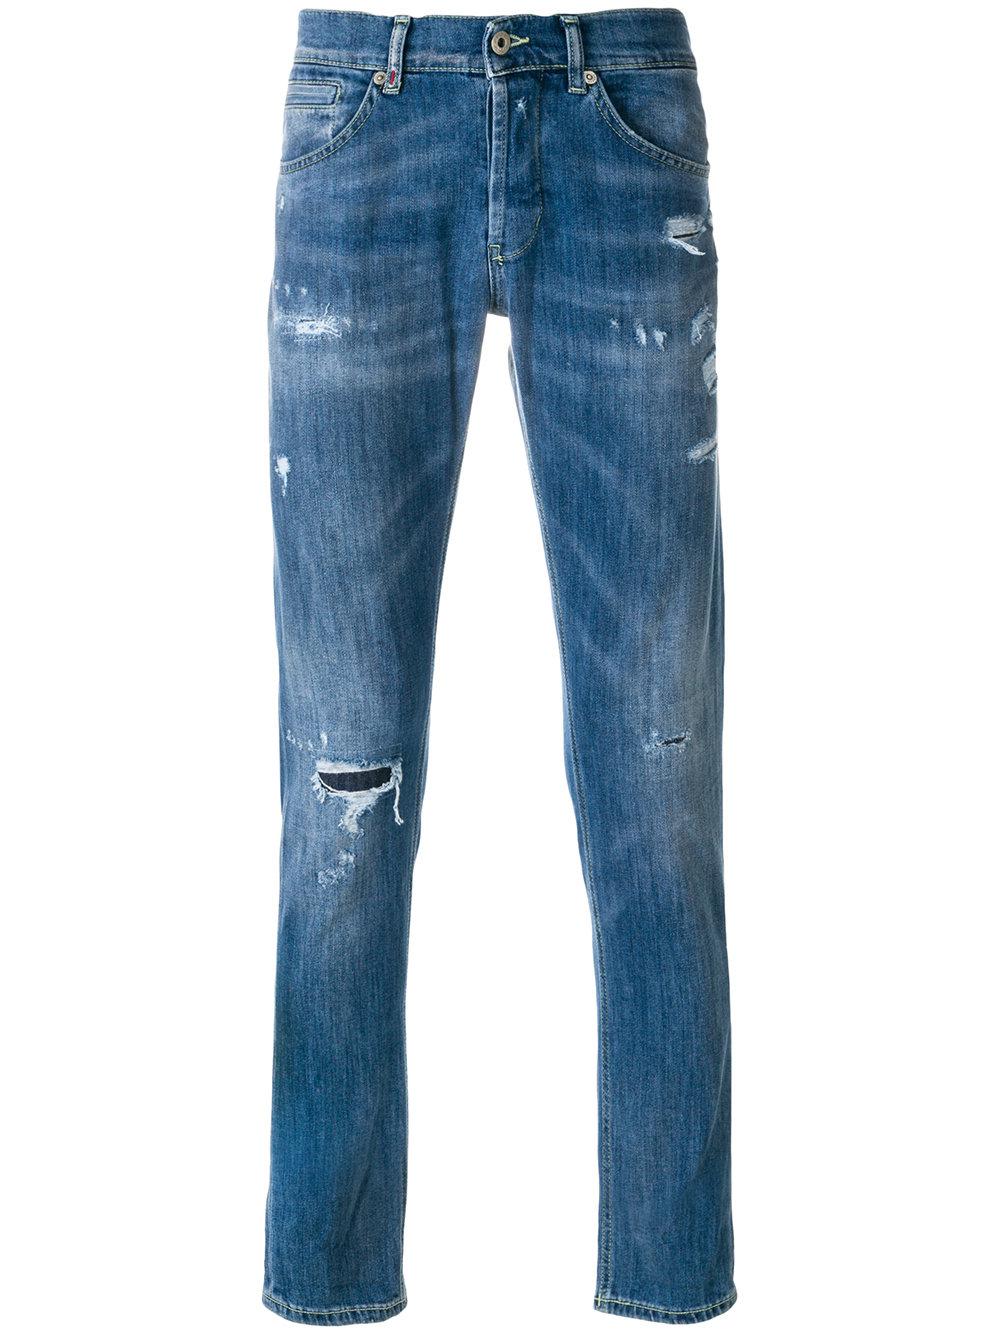 Dondup Cotton George Jeans in Blue for Men - Lyst